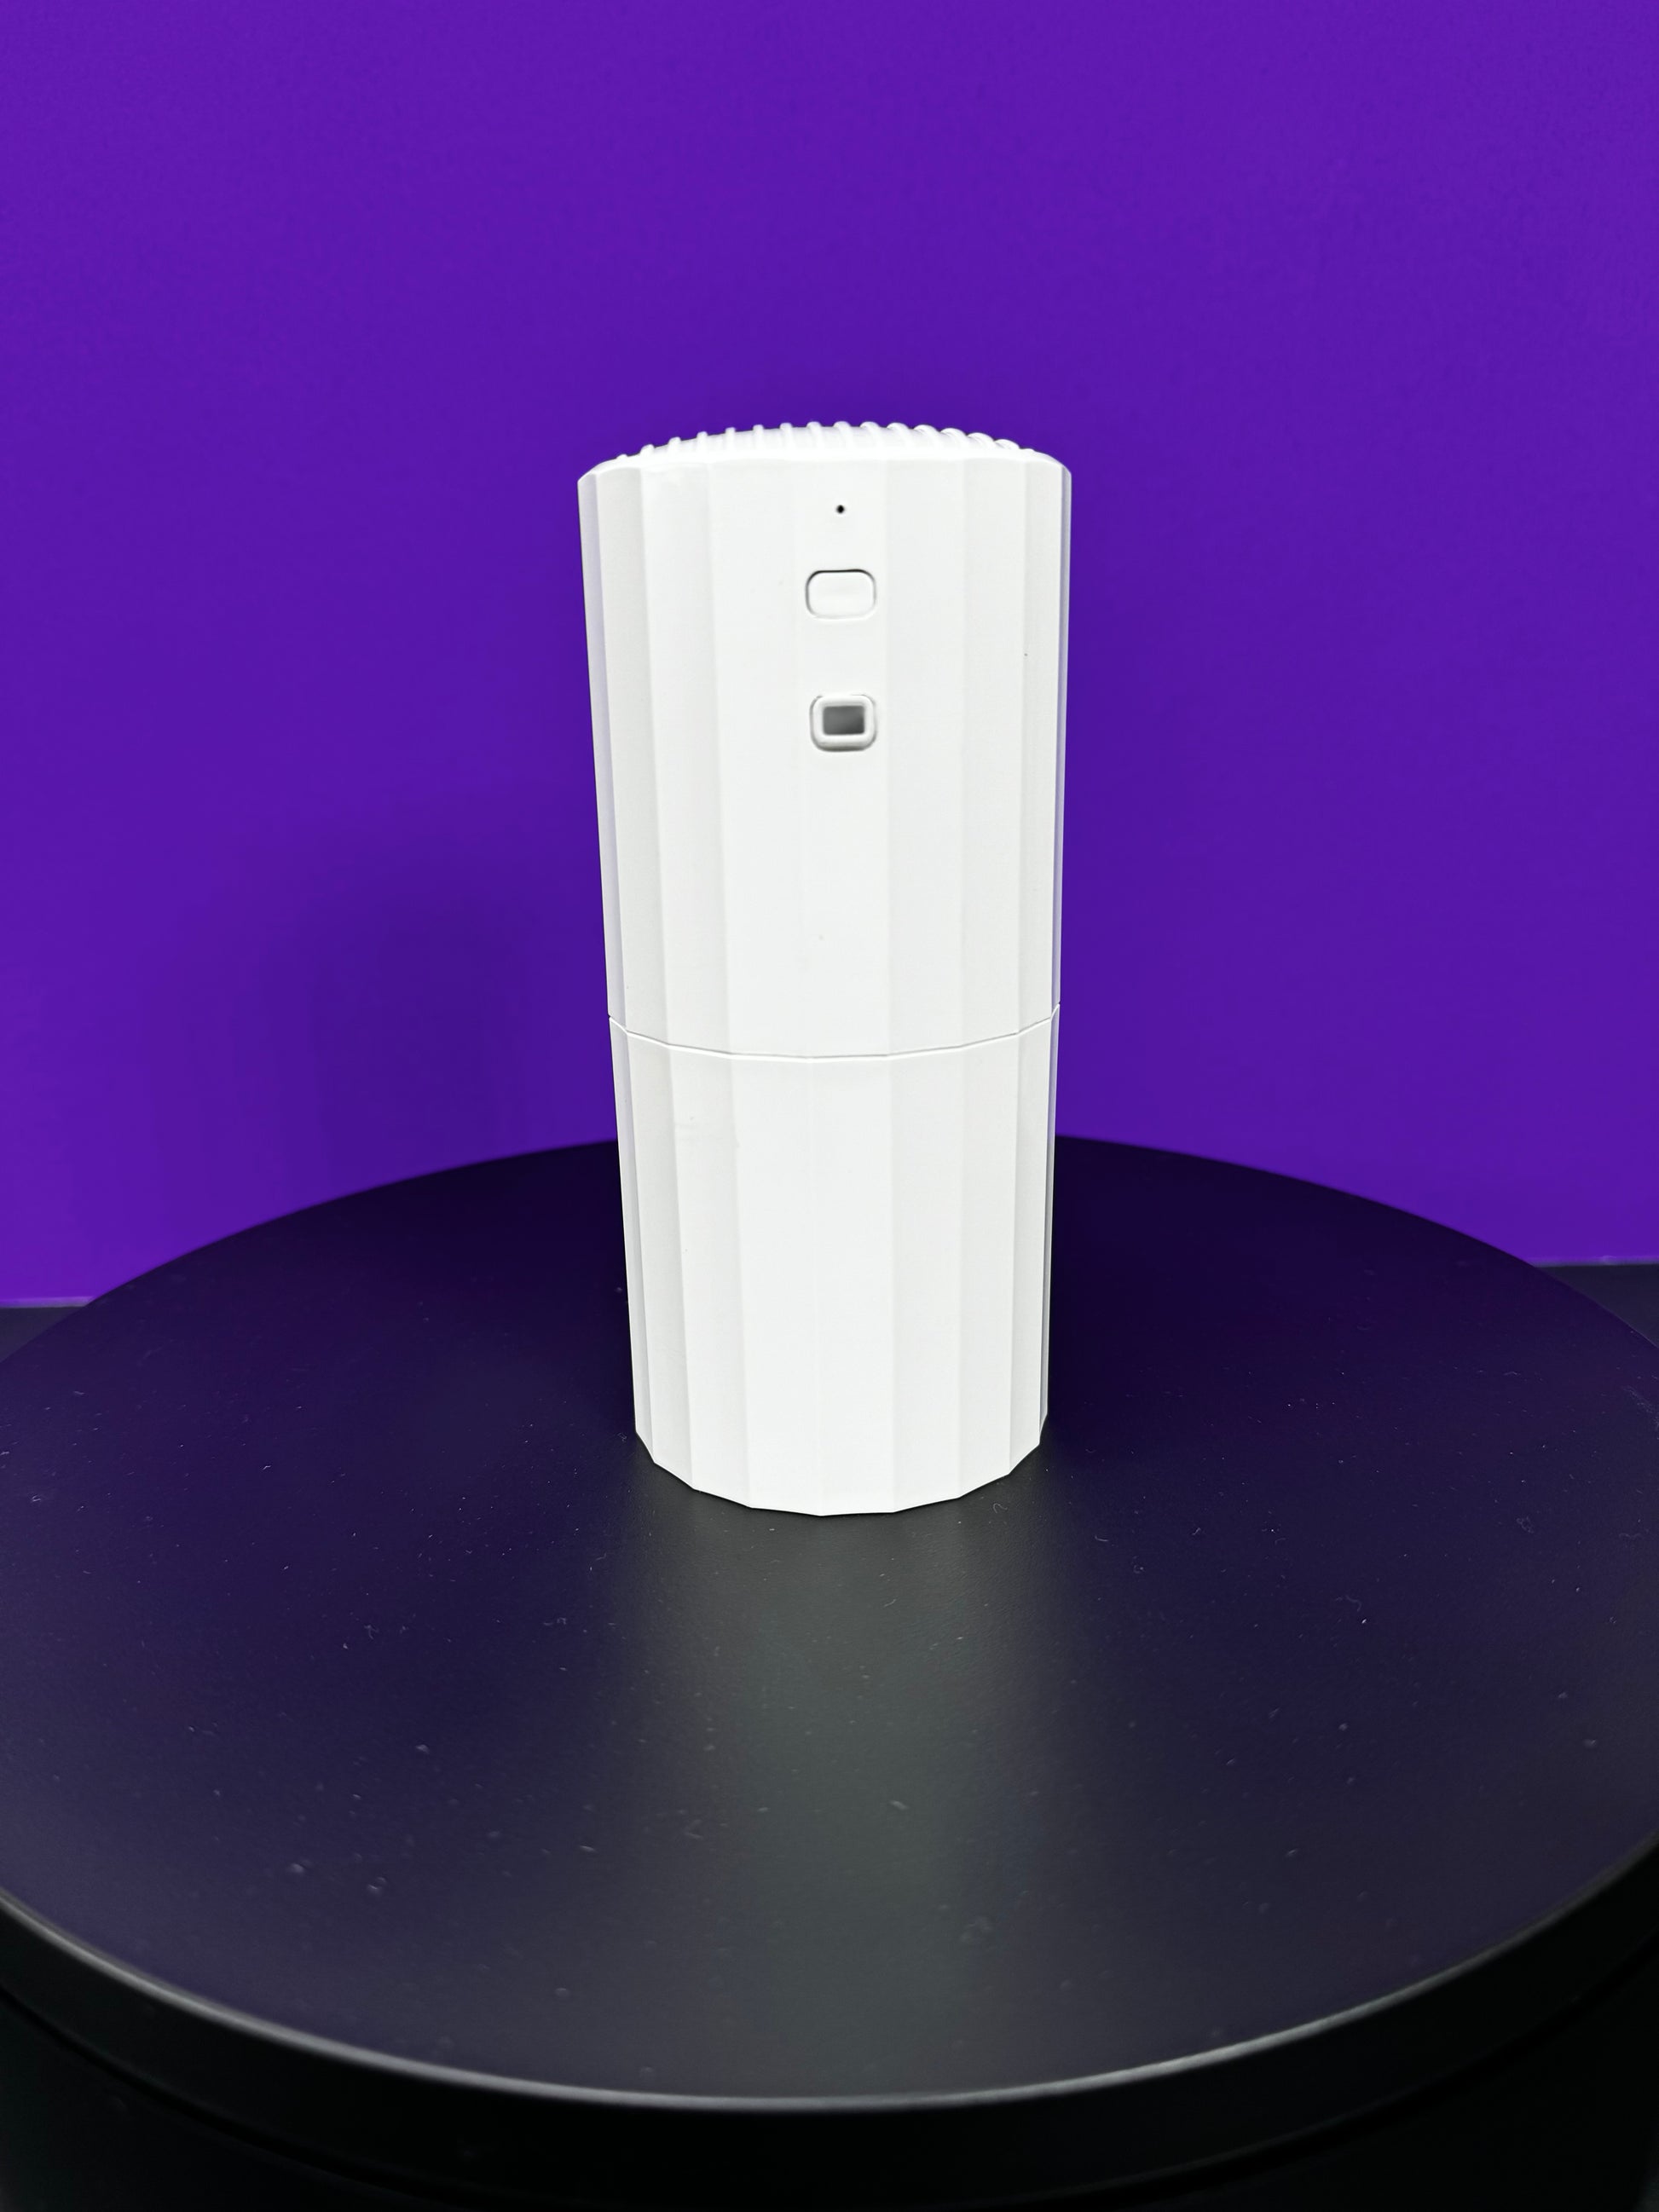 DA Plug In Scent Diffuser sitting on a table in front of a purple wall.